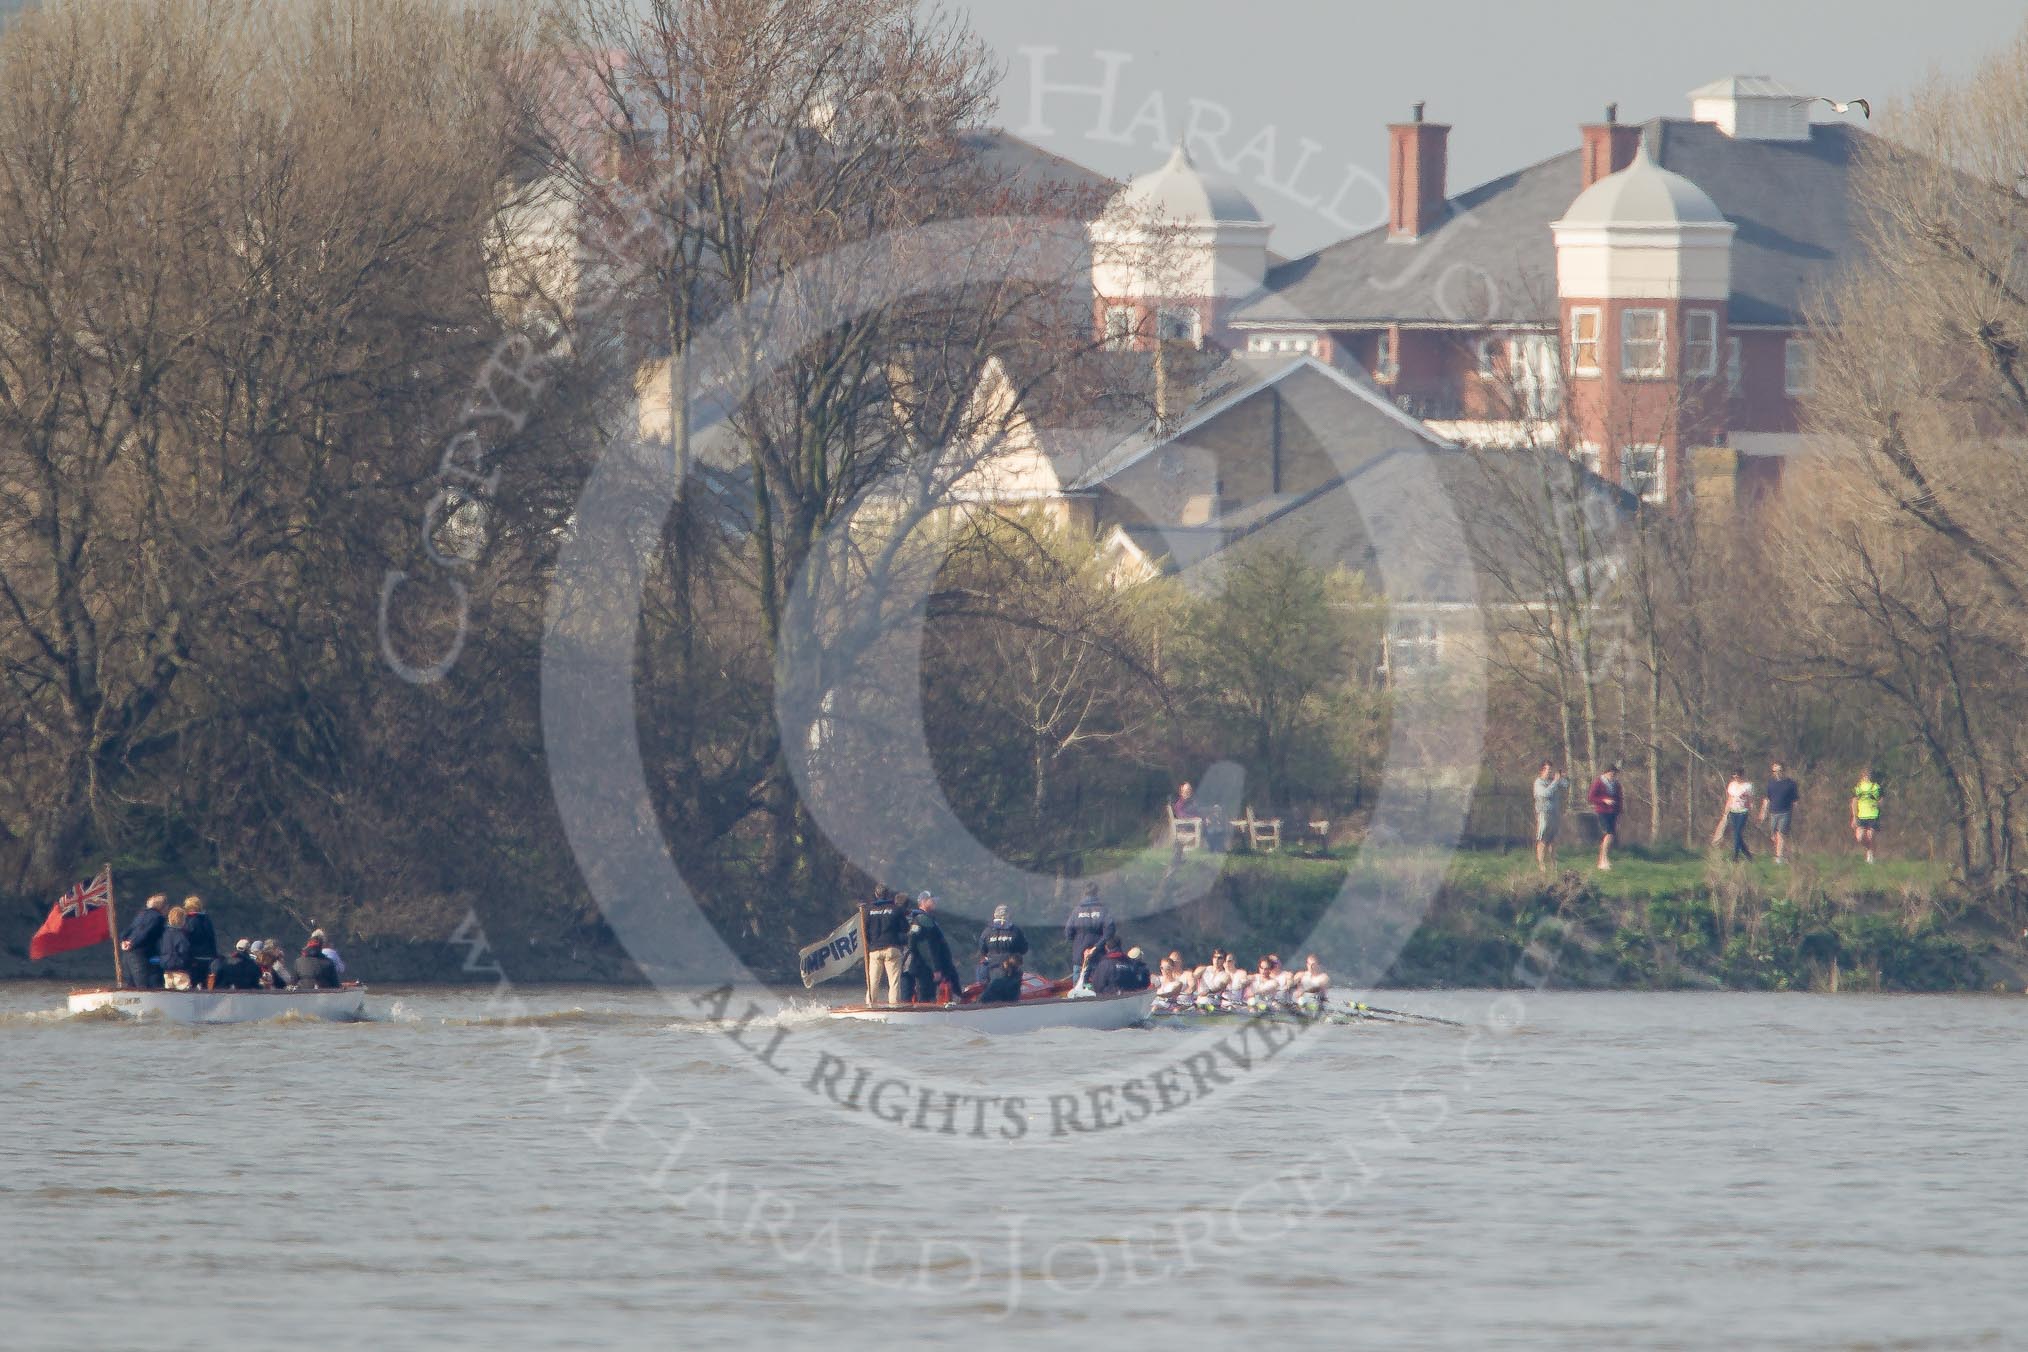 The Boat Race season 2012 - fixture OUBC vs Leander: The OUBC Blue Boat in the lead, near the Mile Post, followed by umpire Richard Phelps..




on 24 March 2012 at 14:31, image #136